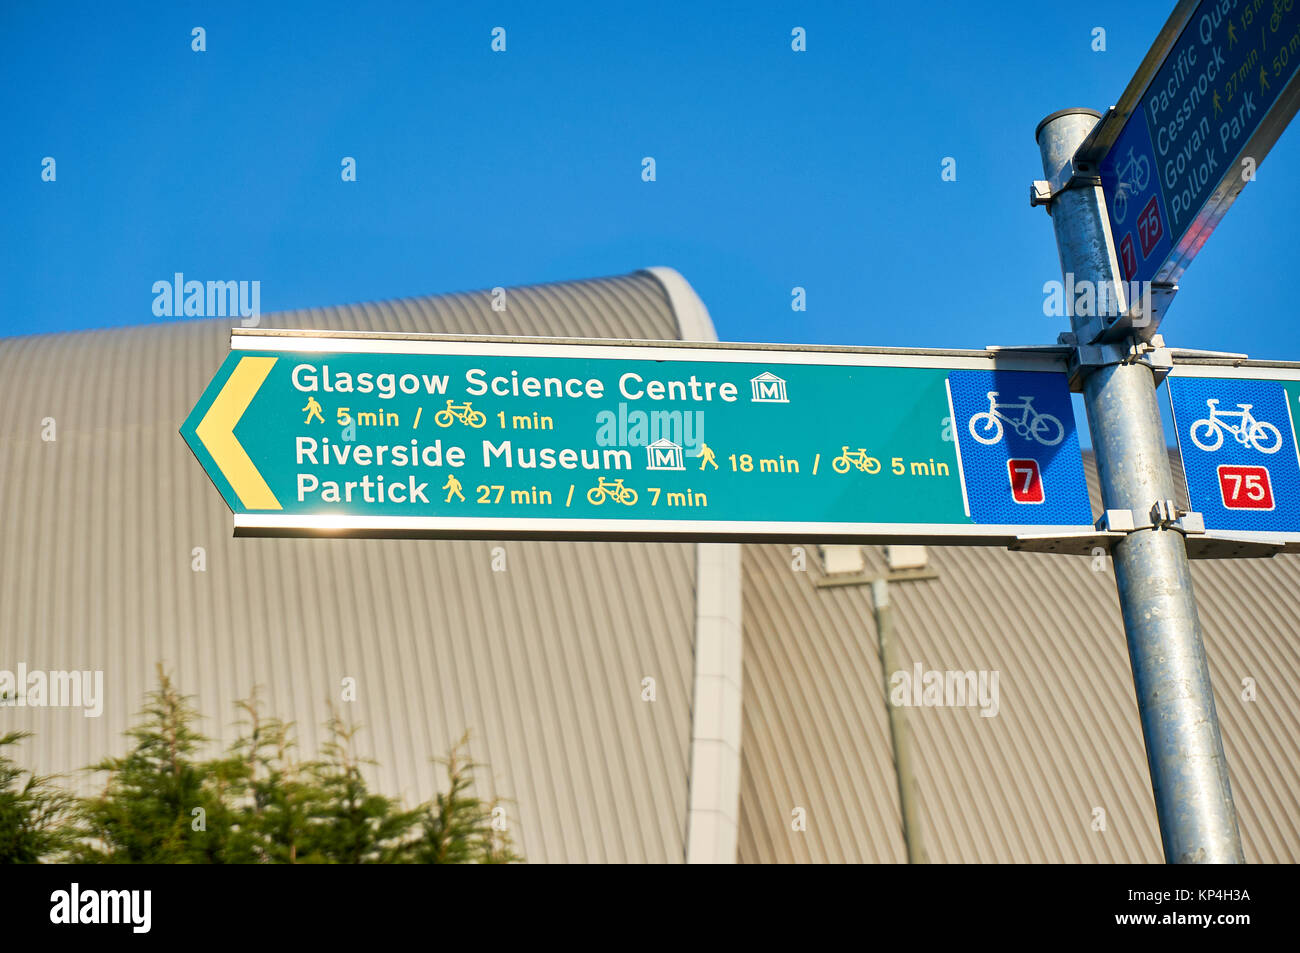 Direction signpost showing anticipated times duration of travel to popular tourists attractions and landmarks in Glasgow, Scotland. Stock Photo